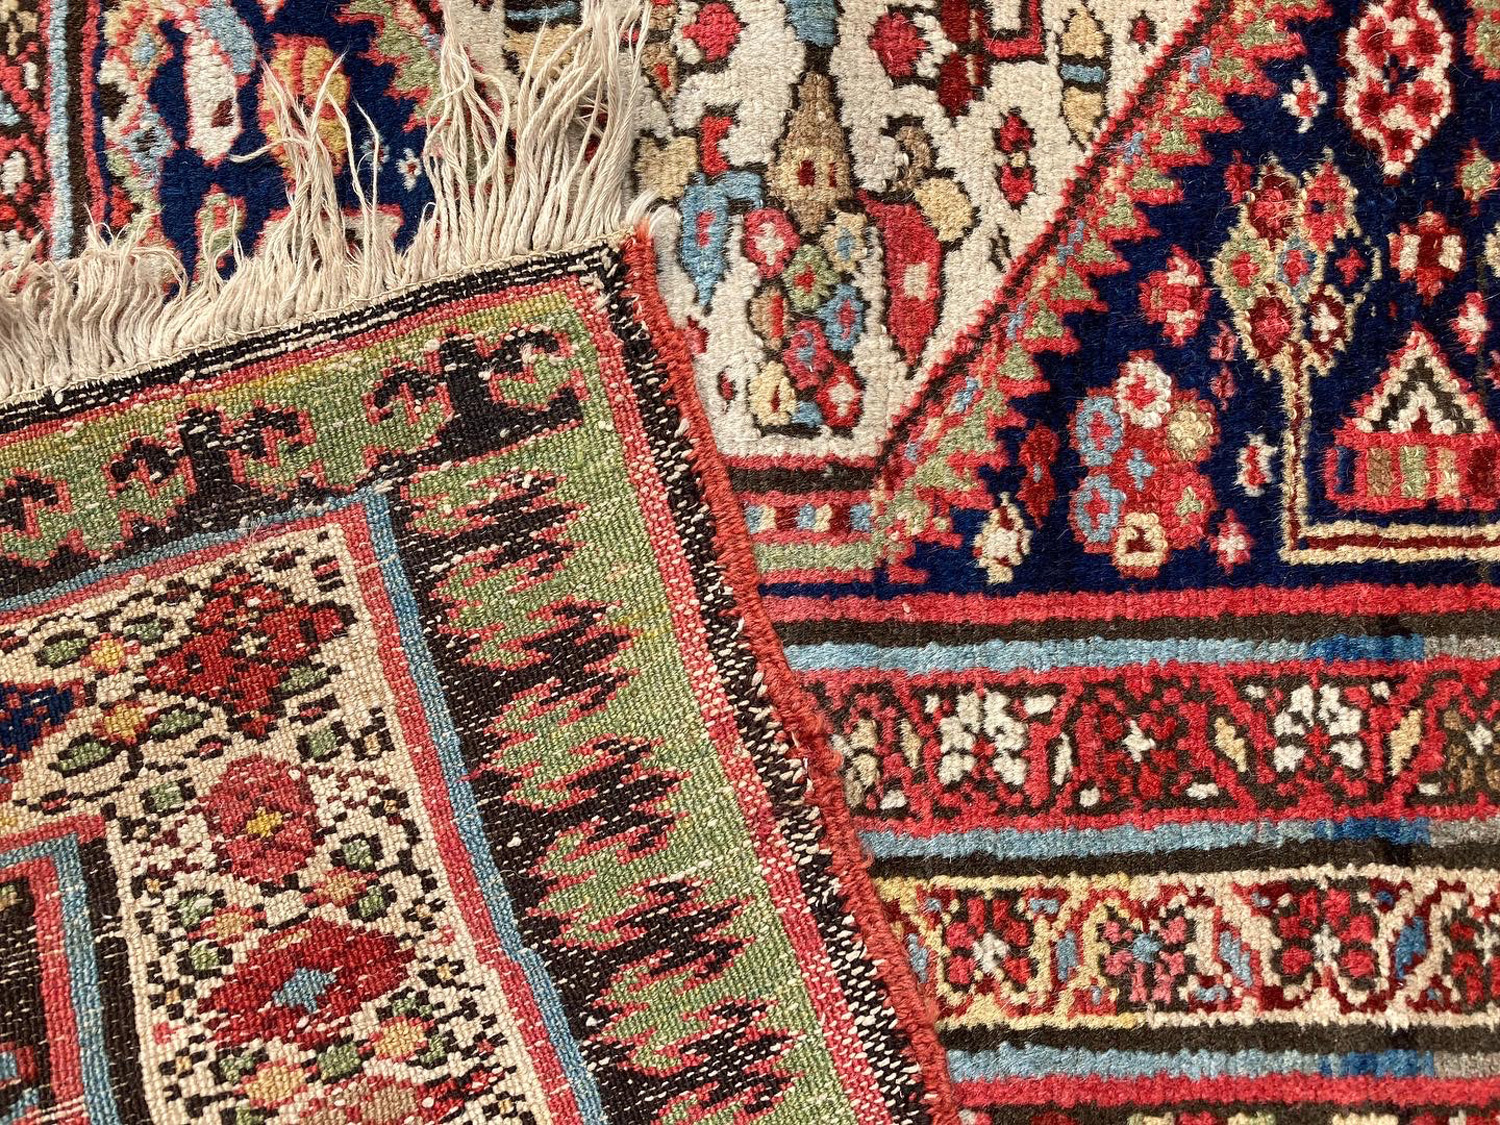 Weave detail of a northwest Persian rug, Douglas Stock Gallery, antique Persian Rugs Boston,MA area